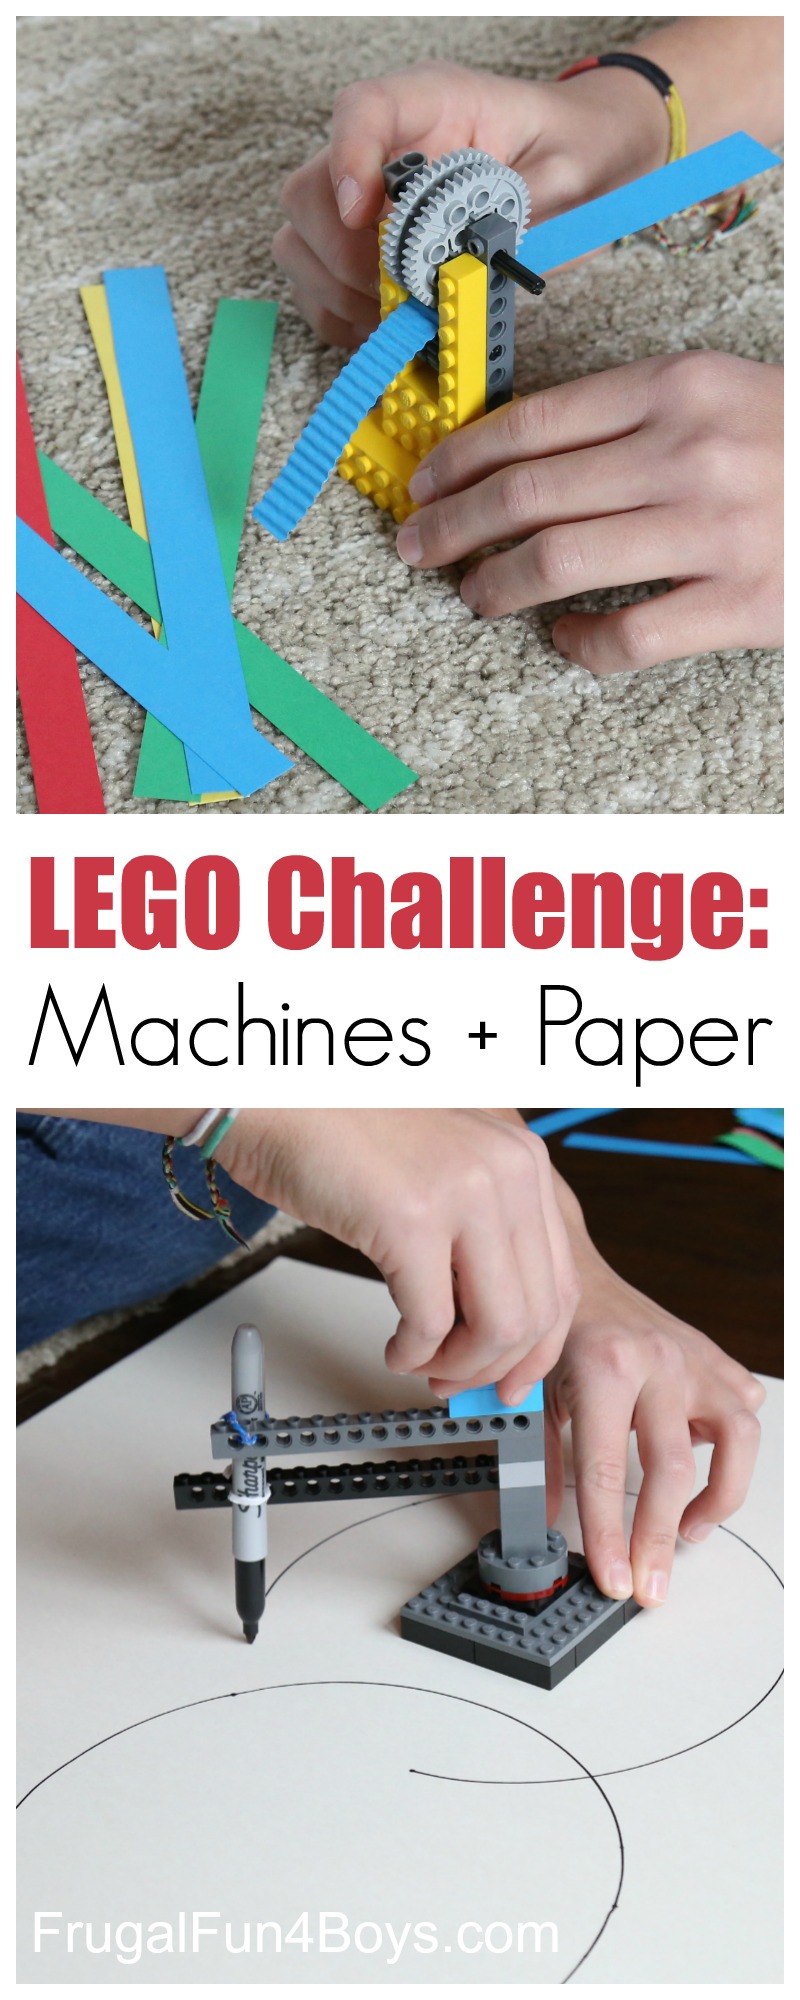 LEGO Challenge: Machines + Paper! Make a paper crimper and a circle drawing machine!